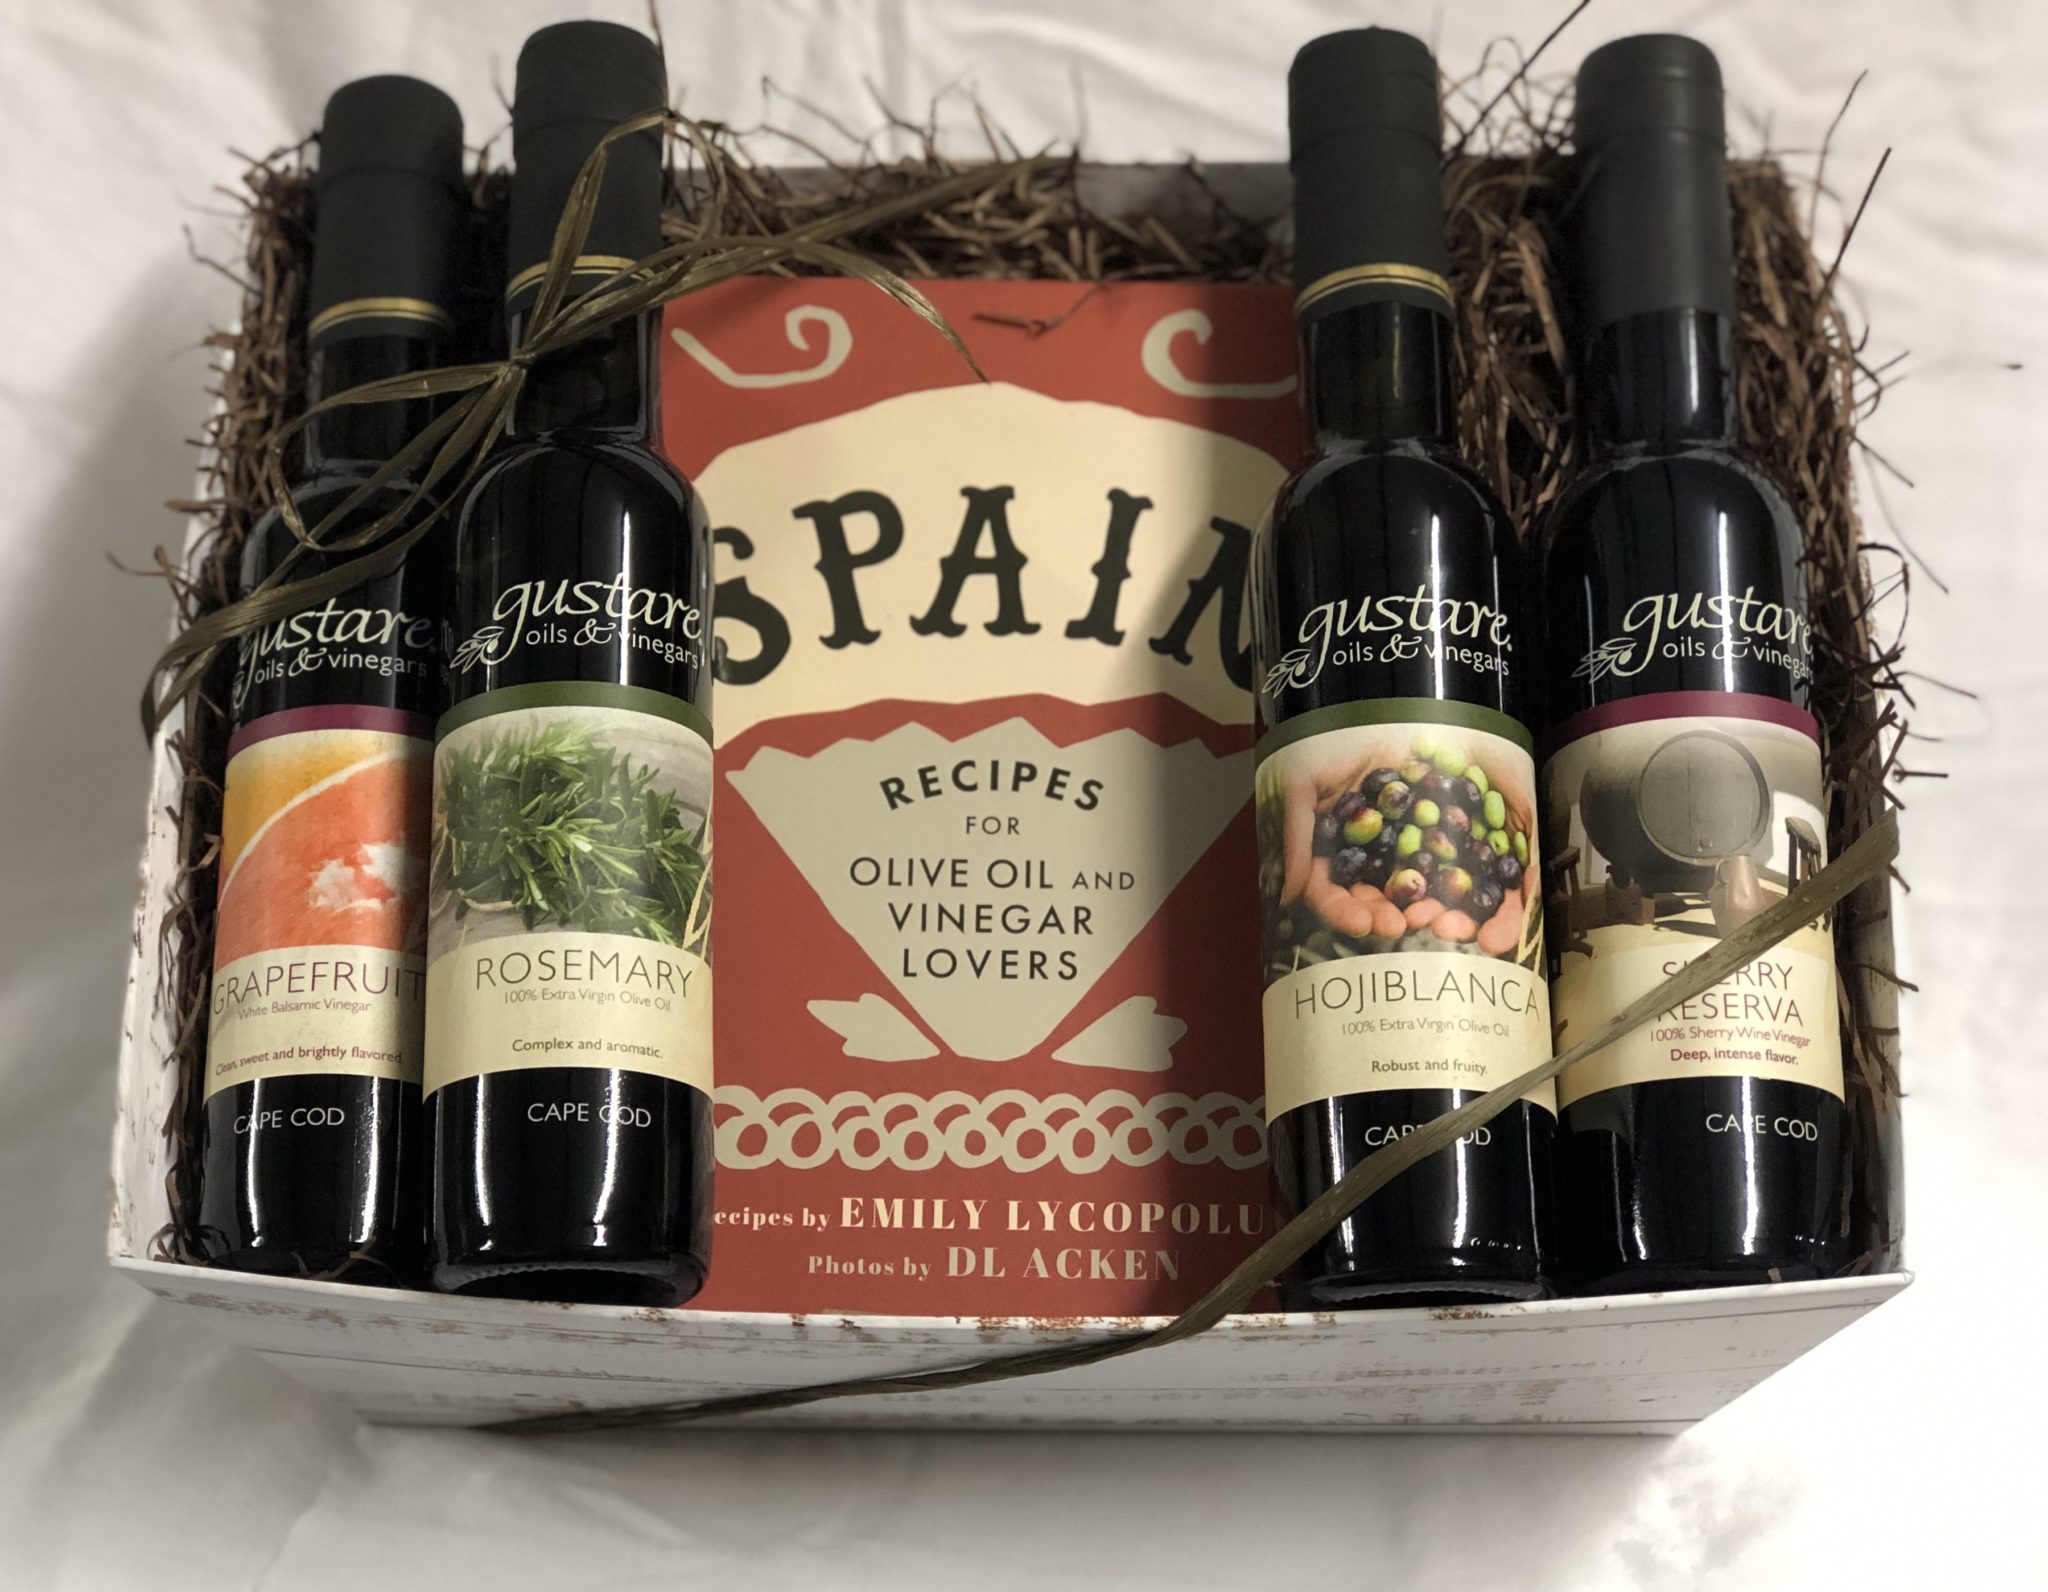 "A Tour of Spain" Gift Box | Gustare